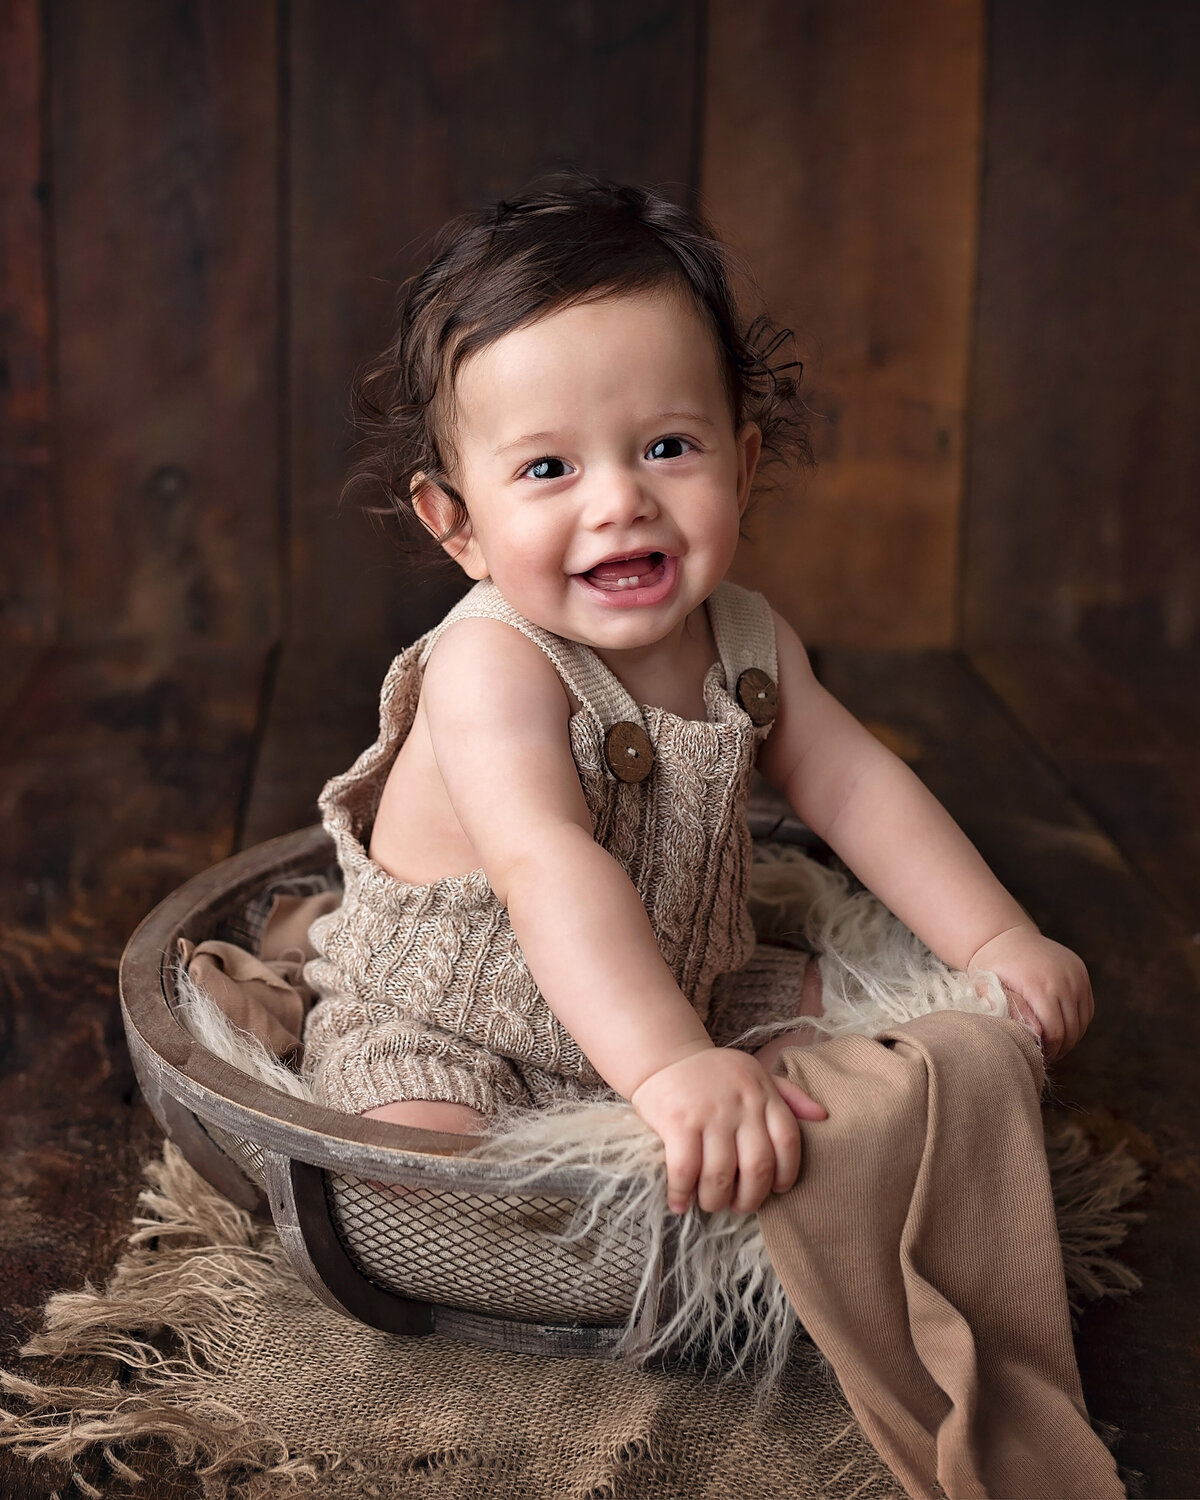 6-month milestone photoshoot at top West Palm Beach photography studio. Baby boy wearing a taupe knit jumper is sitting on furry blankets in a metal and wood basket. Baby is holding the side of the basket with a big toothy smile for the camera.